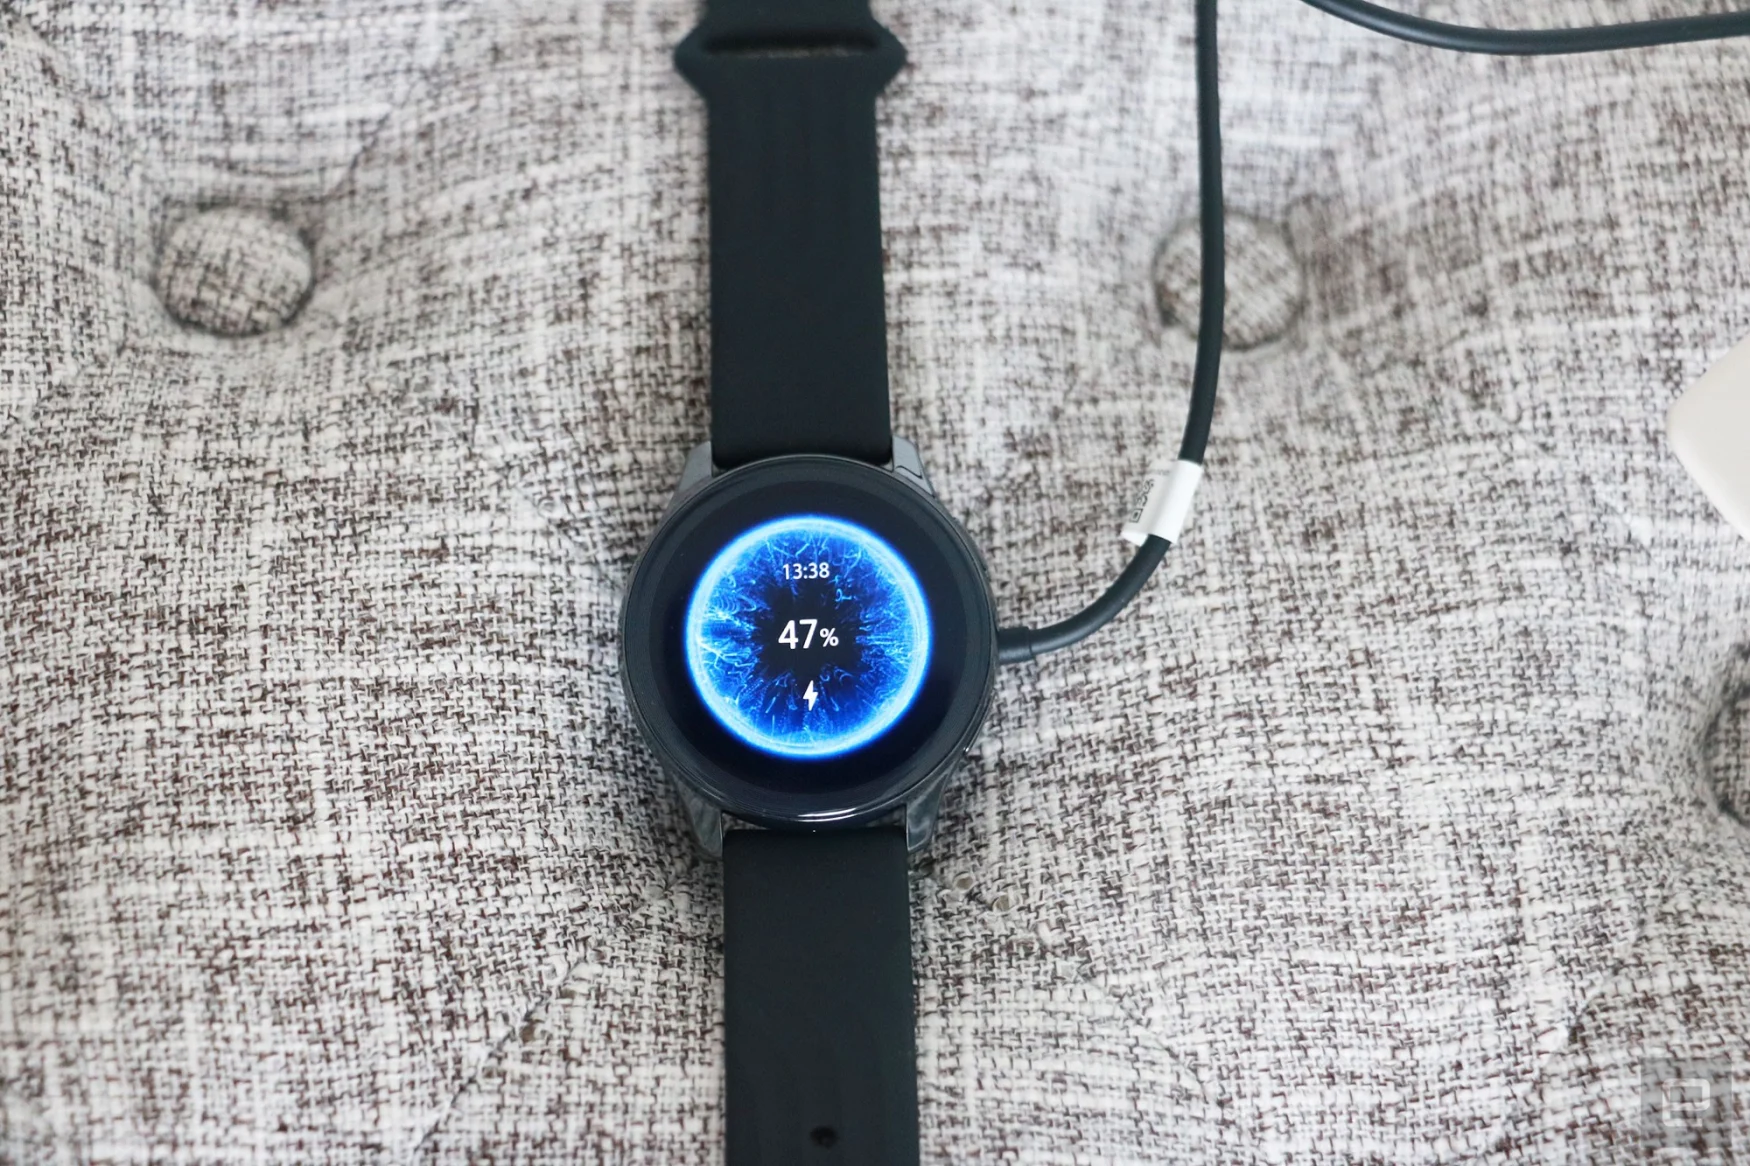 OnePlus Watch review photos. OnePlus Watch on a charger with display showing 47 percent battery and time at 1:38pm.